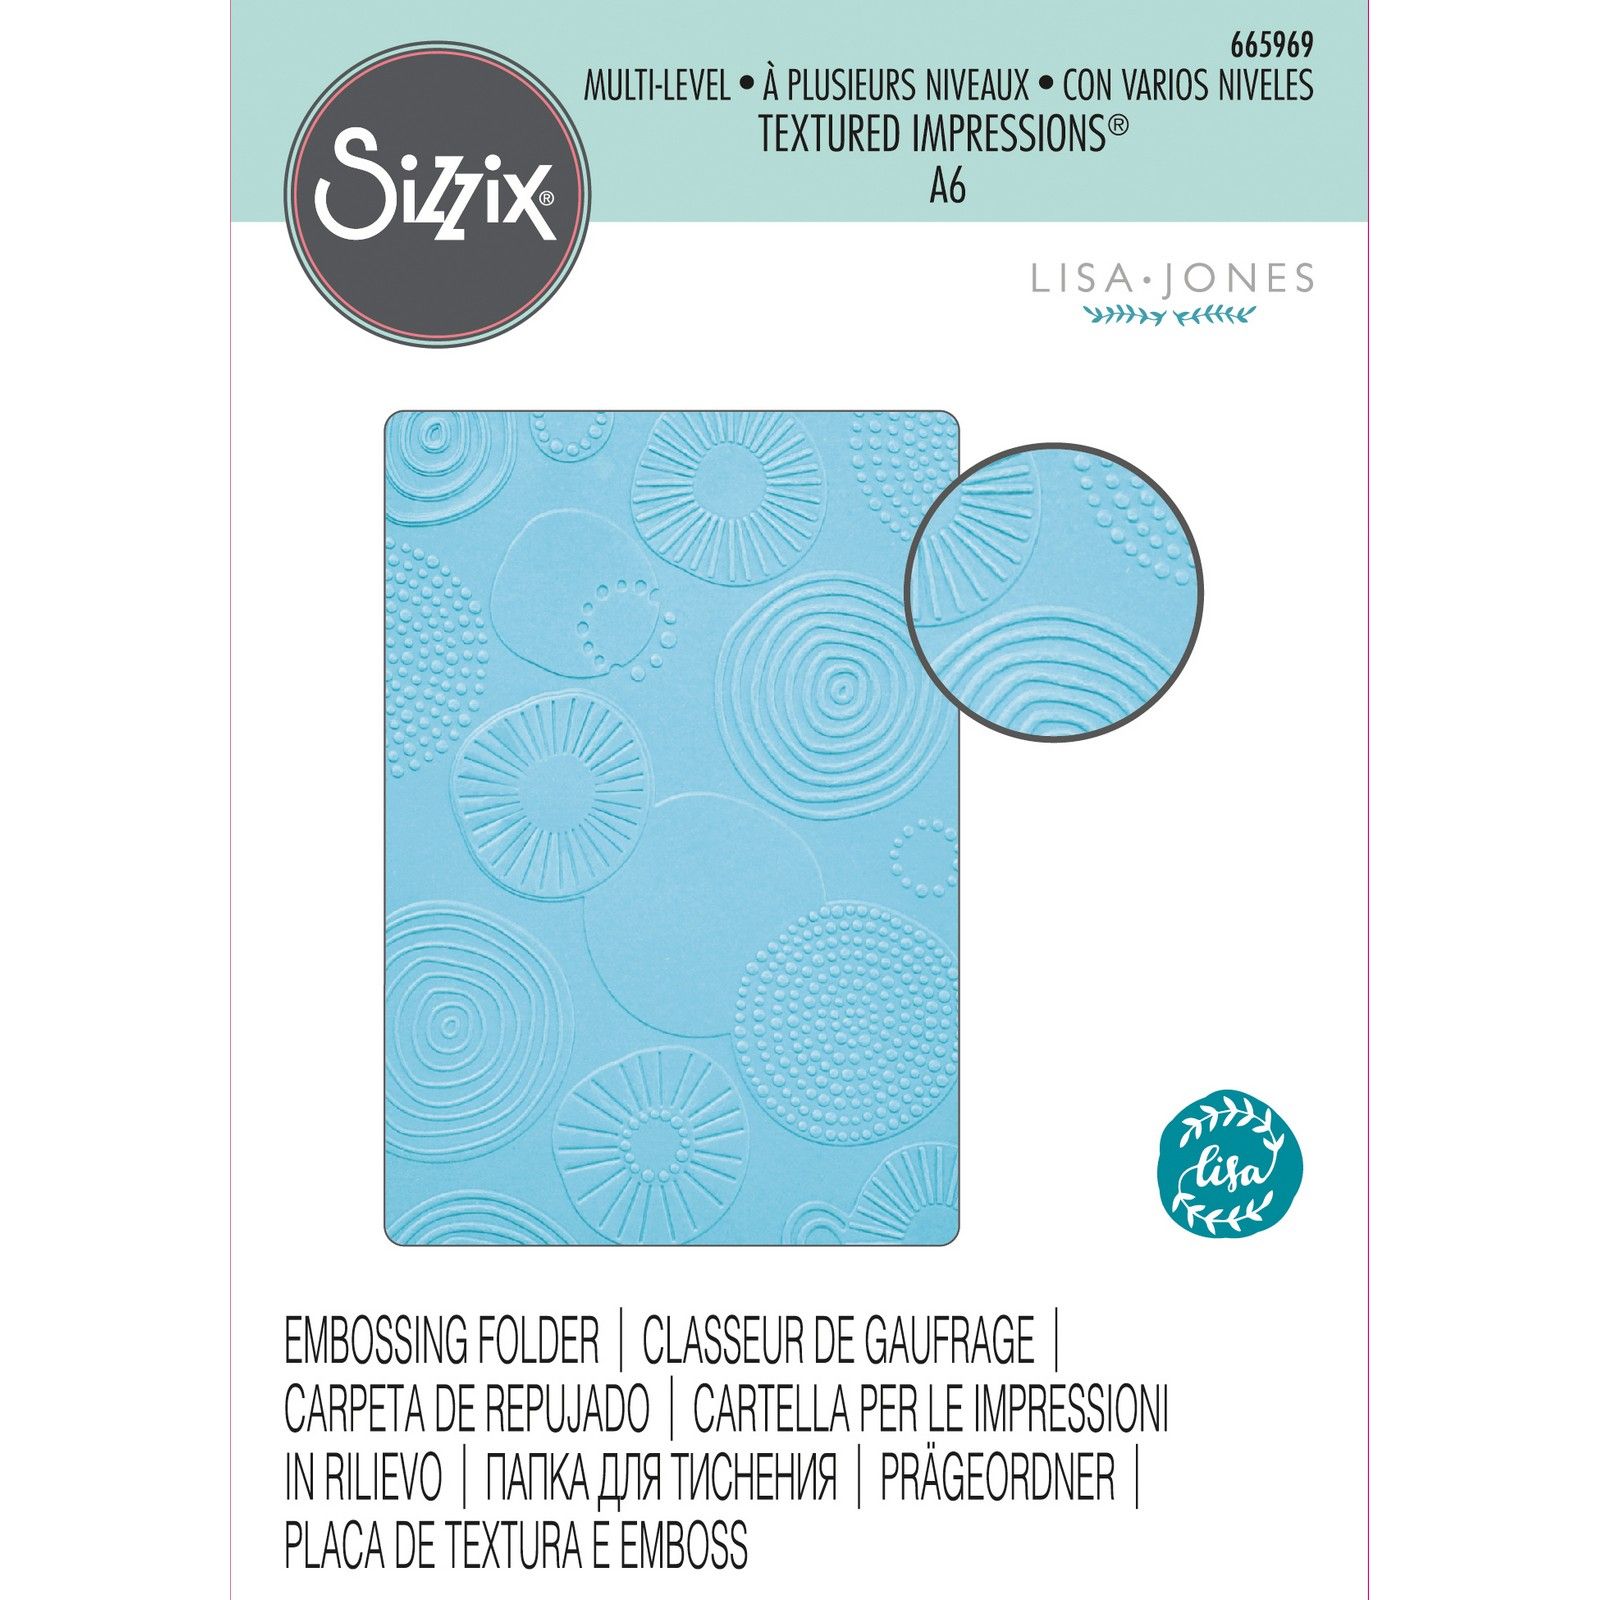 Sizzix Multi-Level Textured Impressions Embossing Folder By Lisa Jones - Abstract Rounds